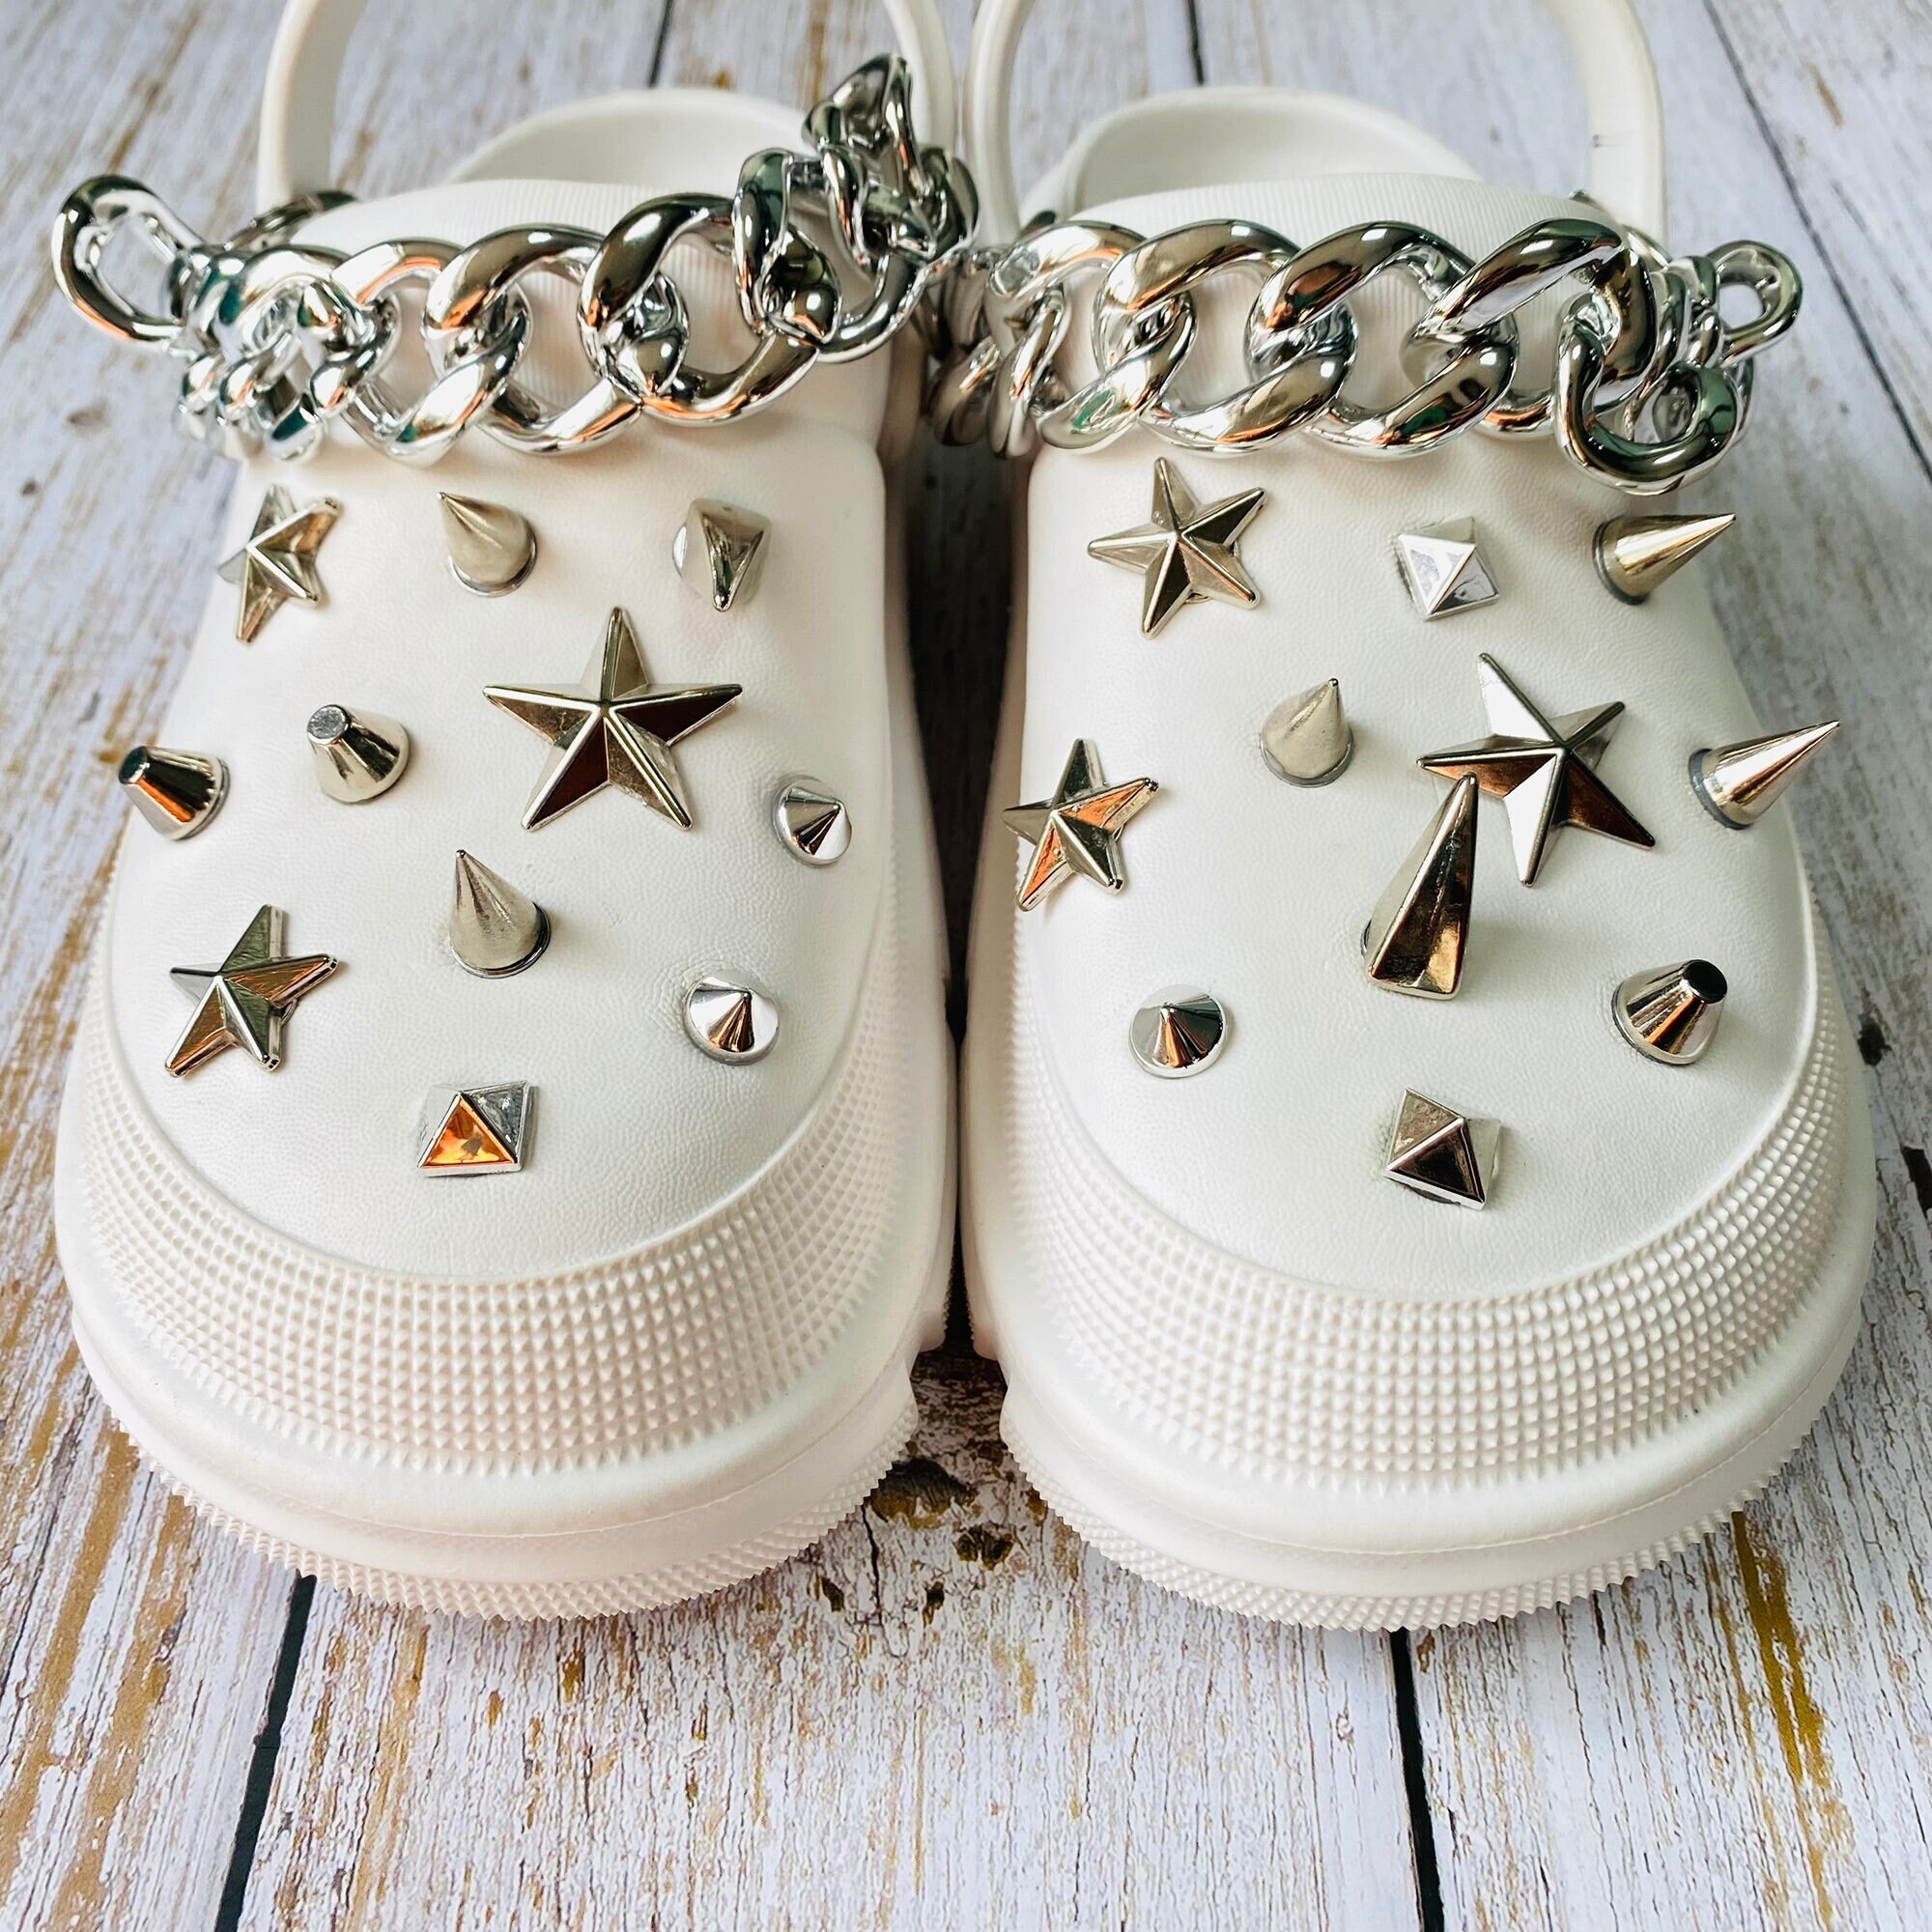 Rivet Spike Shoes Buckle,Metal Star Shoe Charms Set with Chain,Unique Shoe Buckles Without Shoe,Shoe Charms Bling,DIY Shoes Accessories,Gift